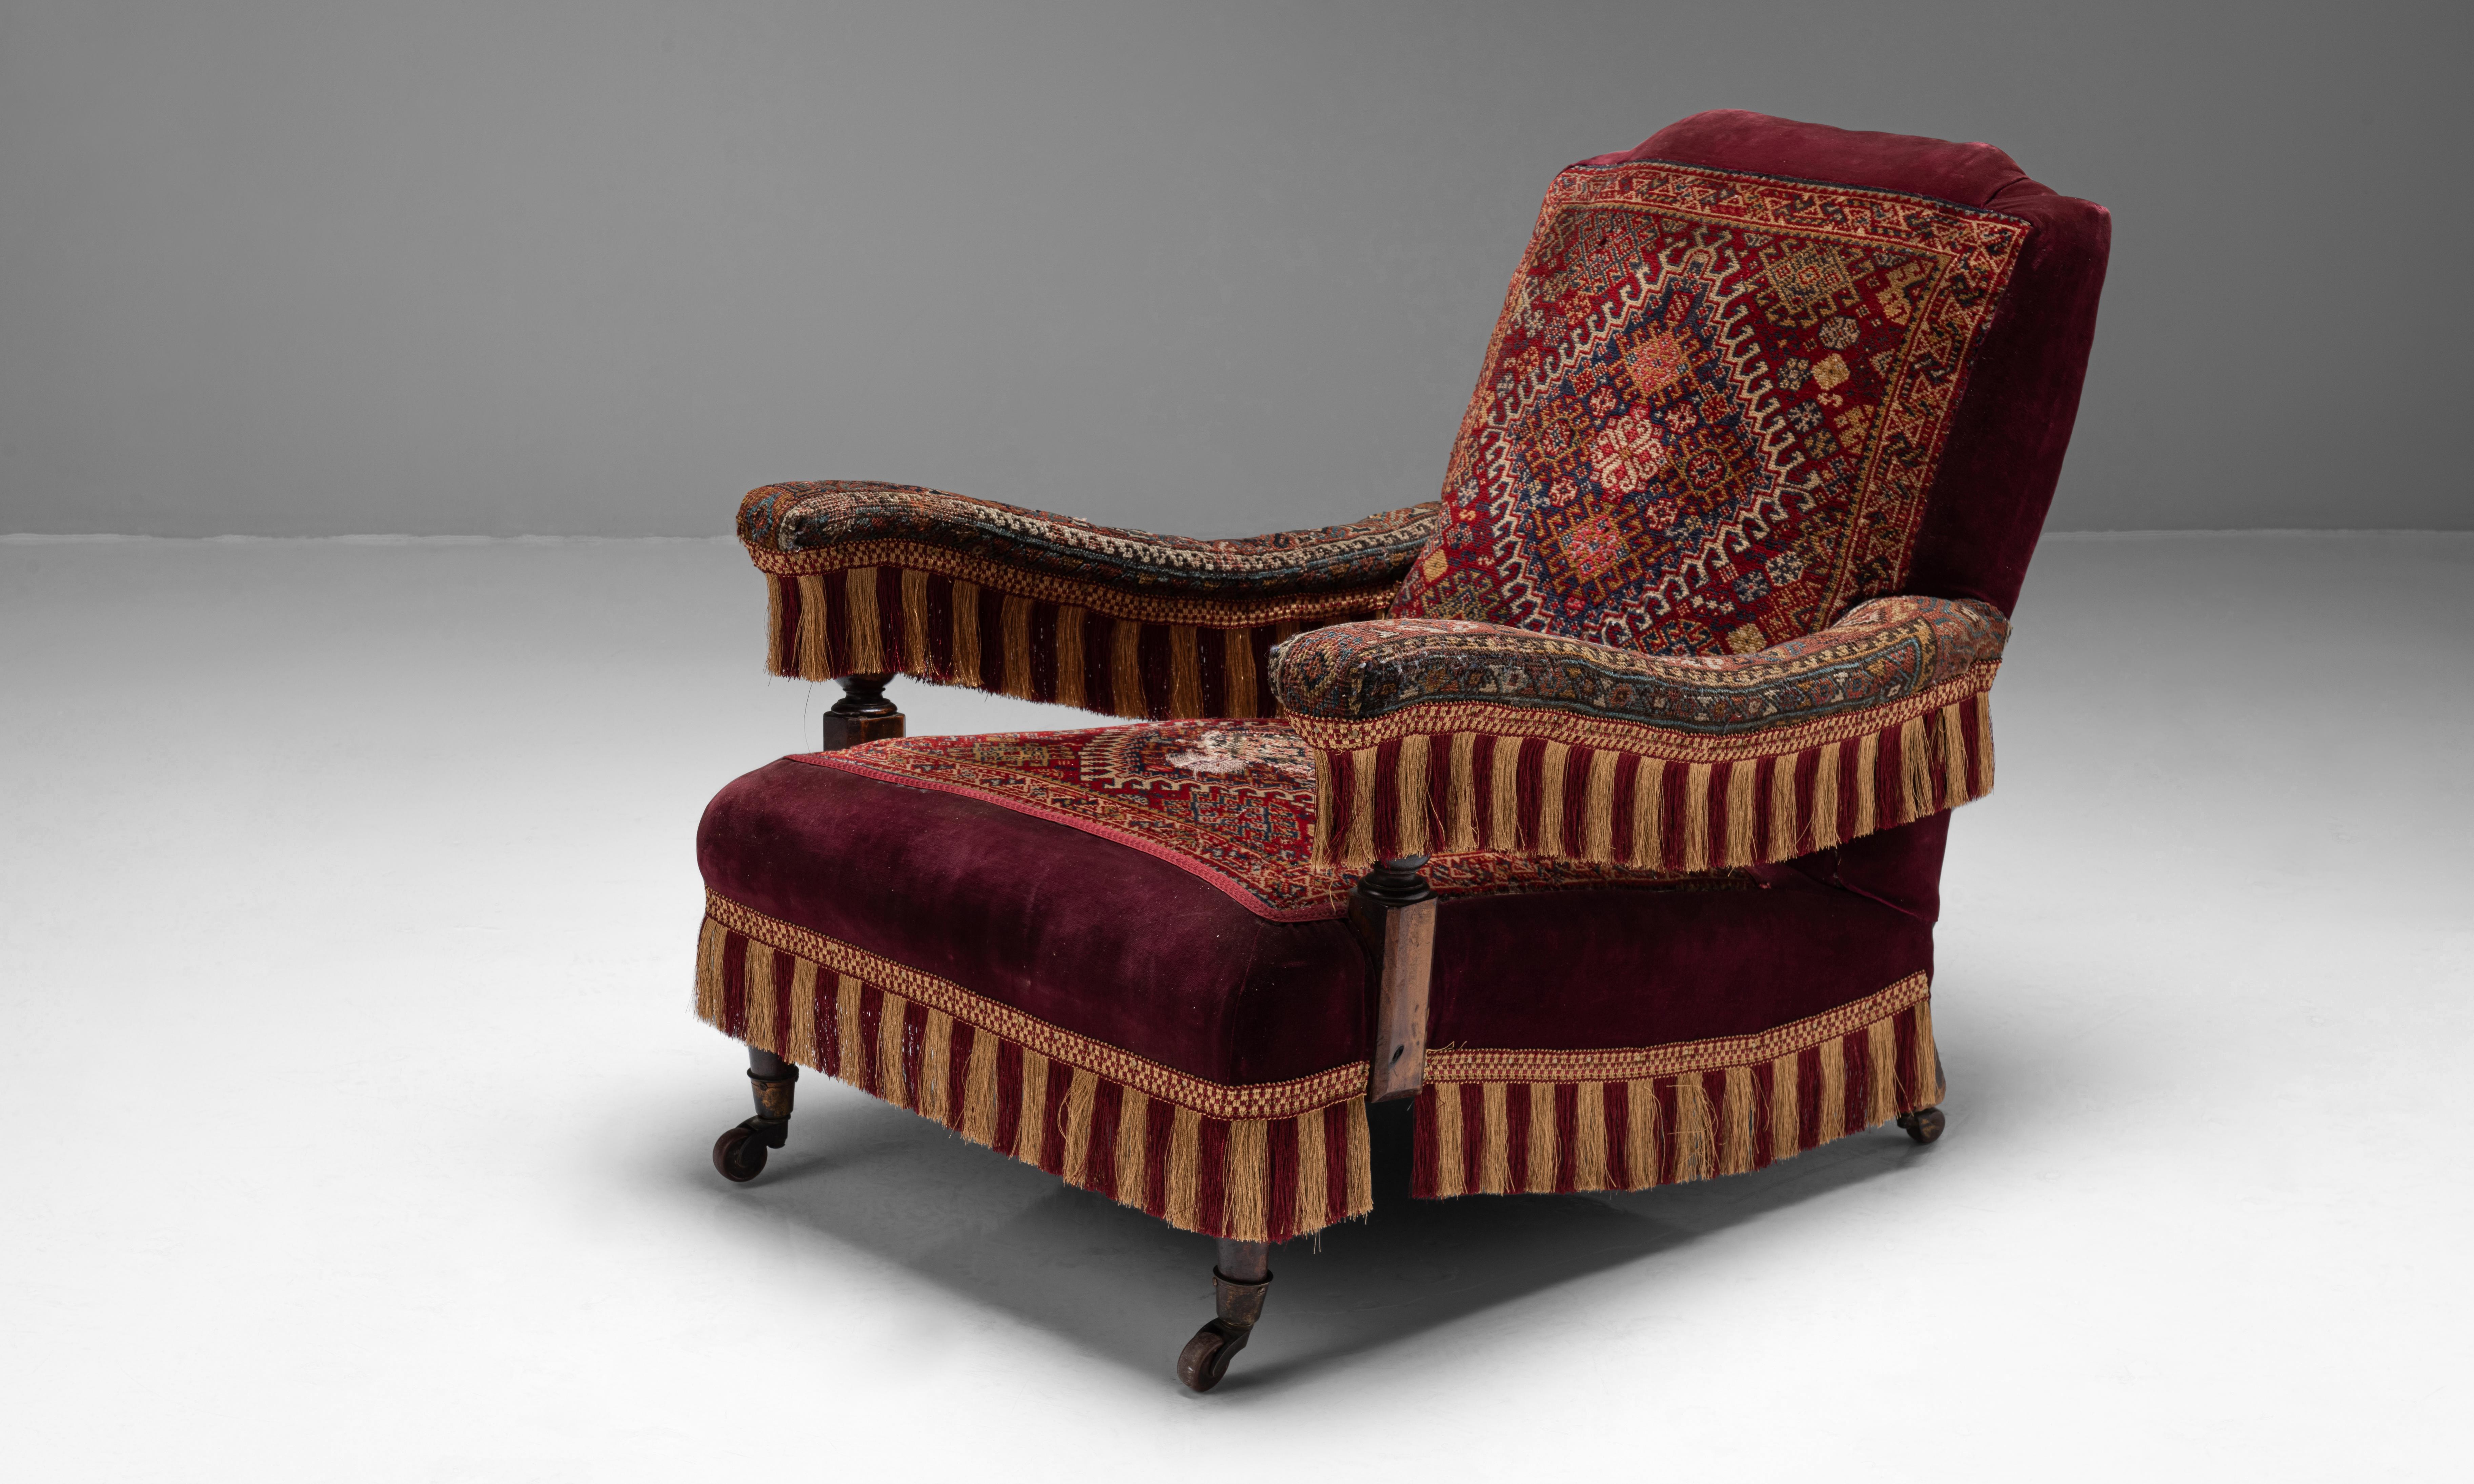 Victorian carpet chair, England, circa 1880

Exquisite carpet chair with original velvet + carpet panel upholstery and two-tone decorative fringe.

Measures: 30 W x 39 D x 32.75 H.